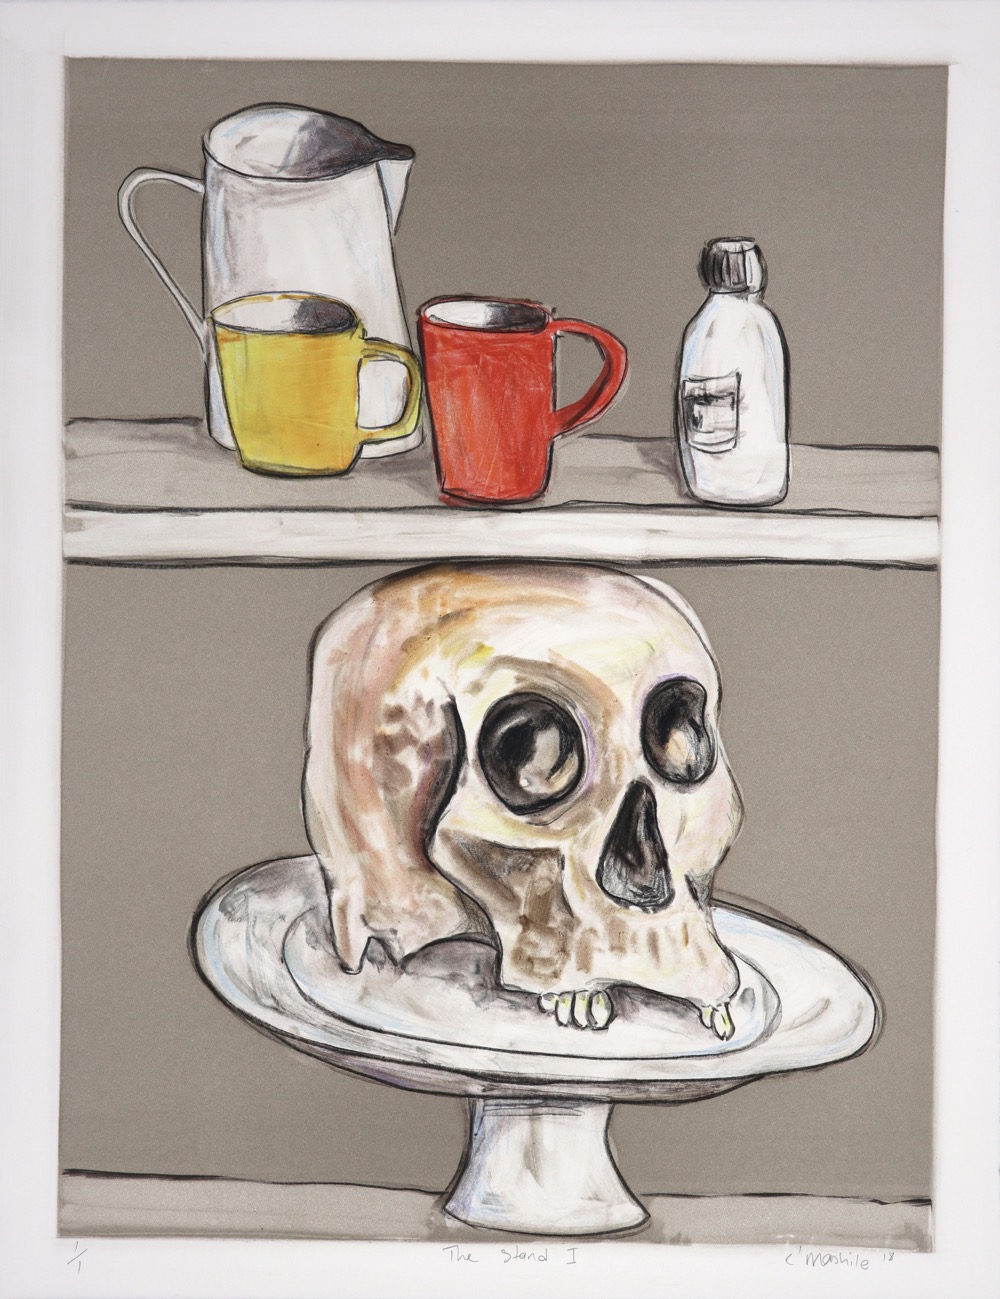 Shelves holding kitchen vessels and human skull on a cake stand.